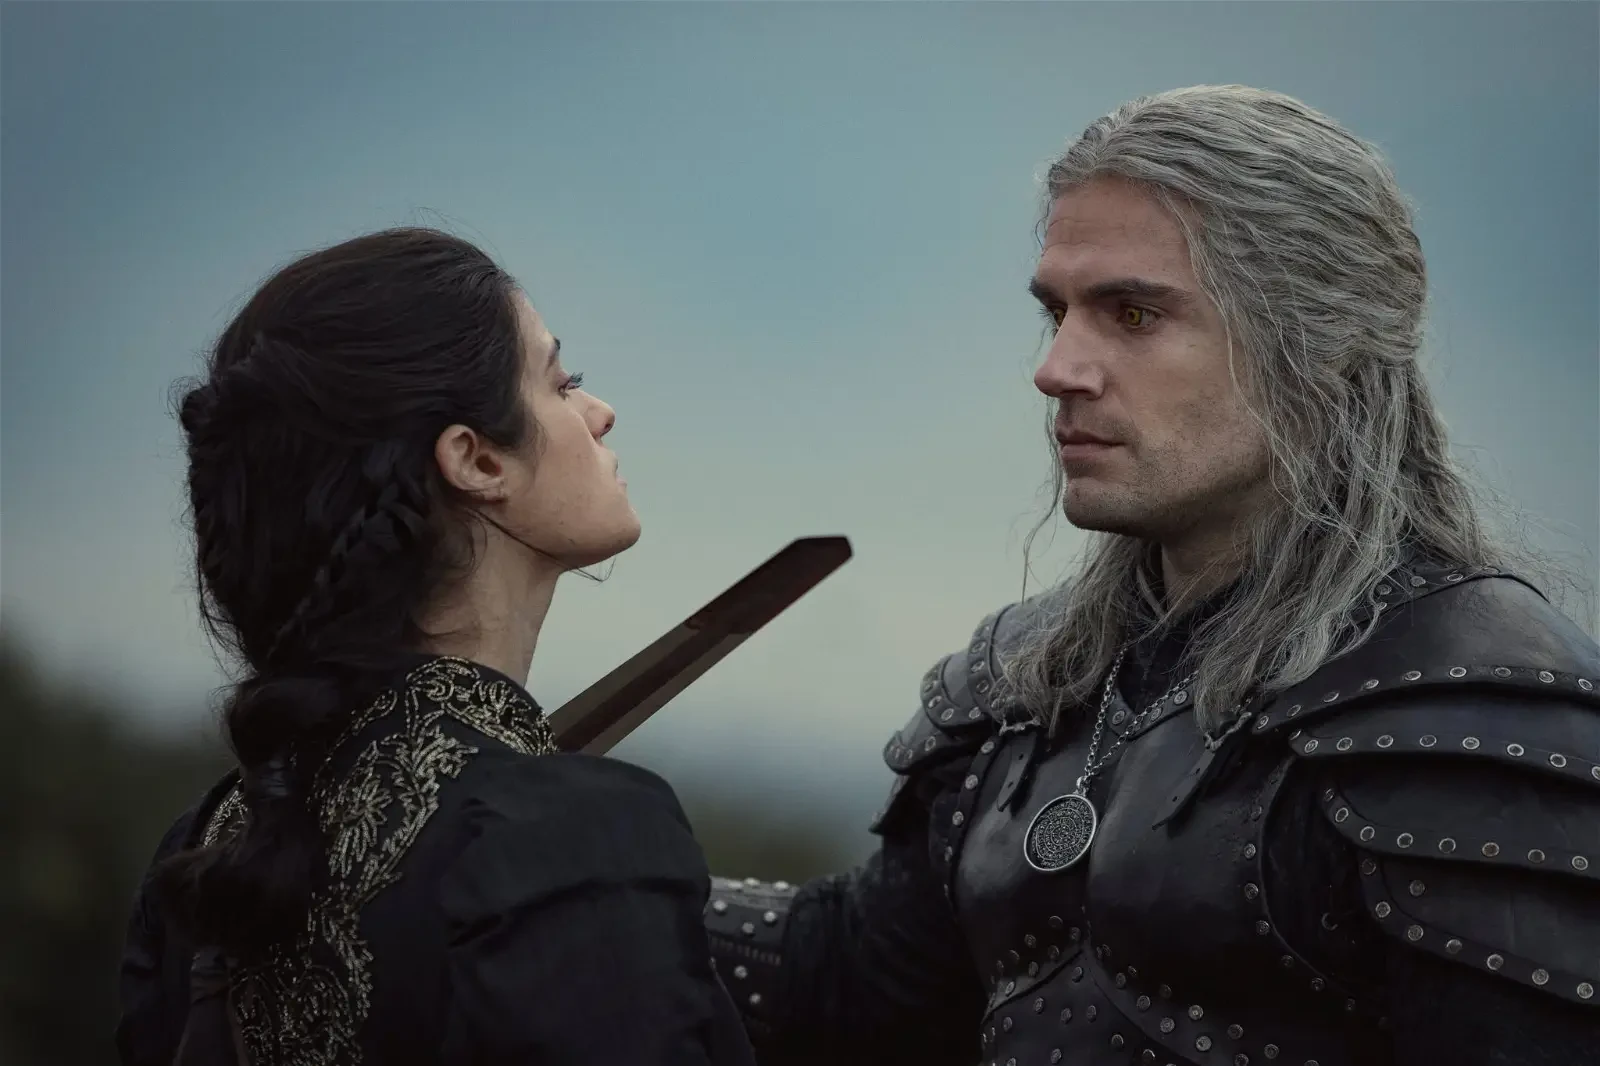 Anya Chalotra and Henry Cavill as Yennefer and Geralt